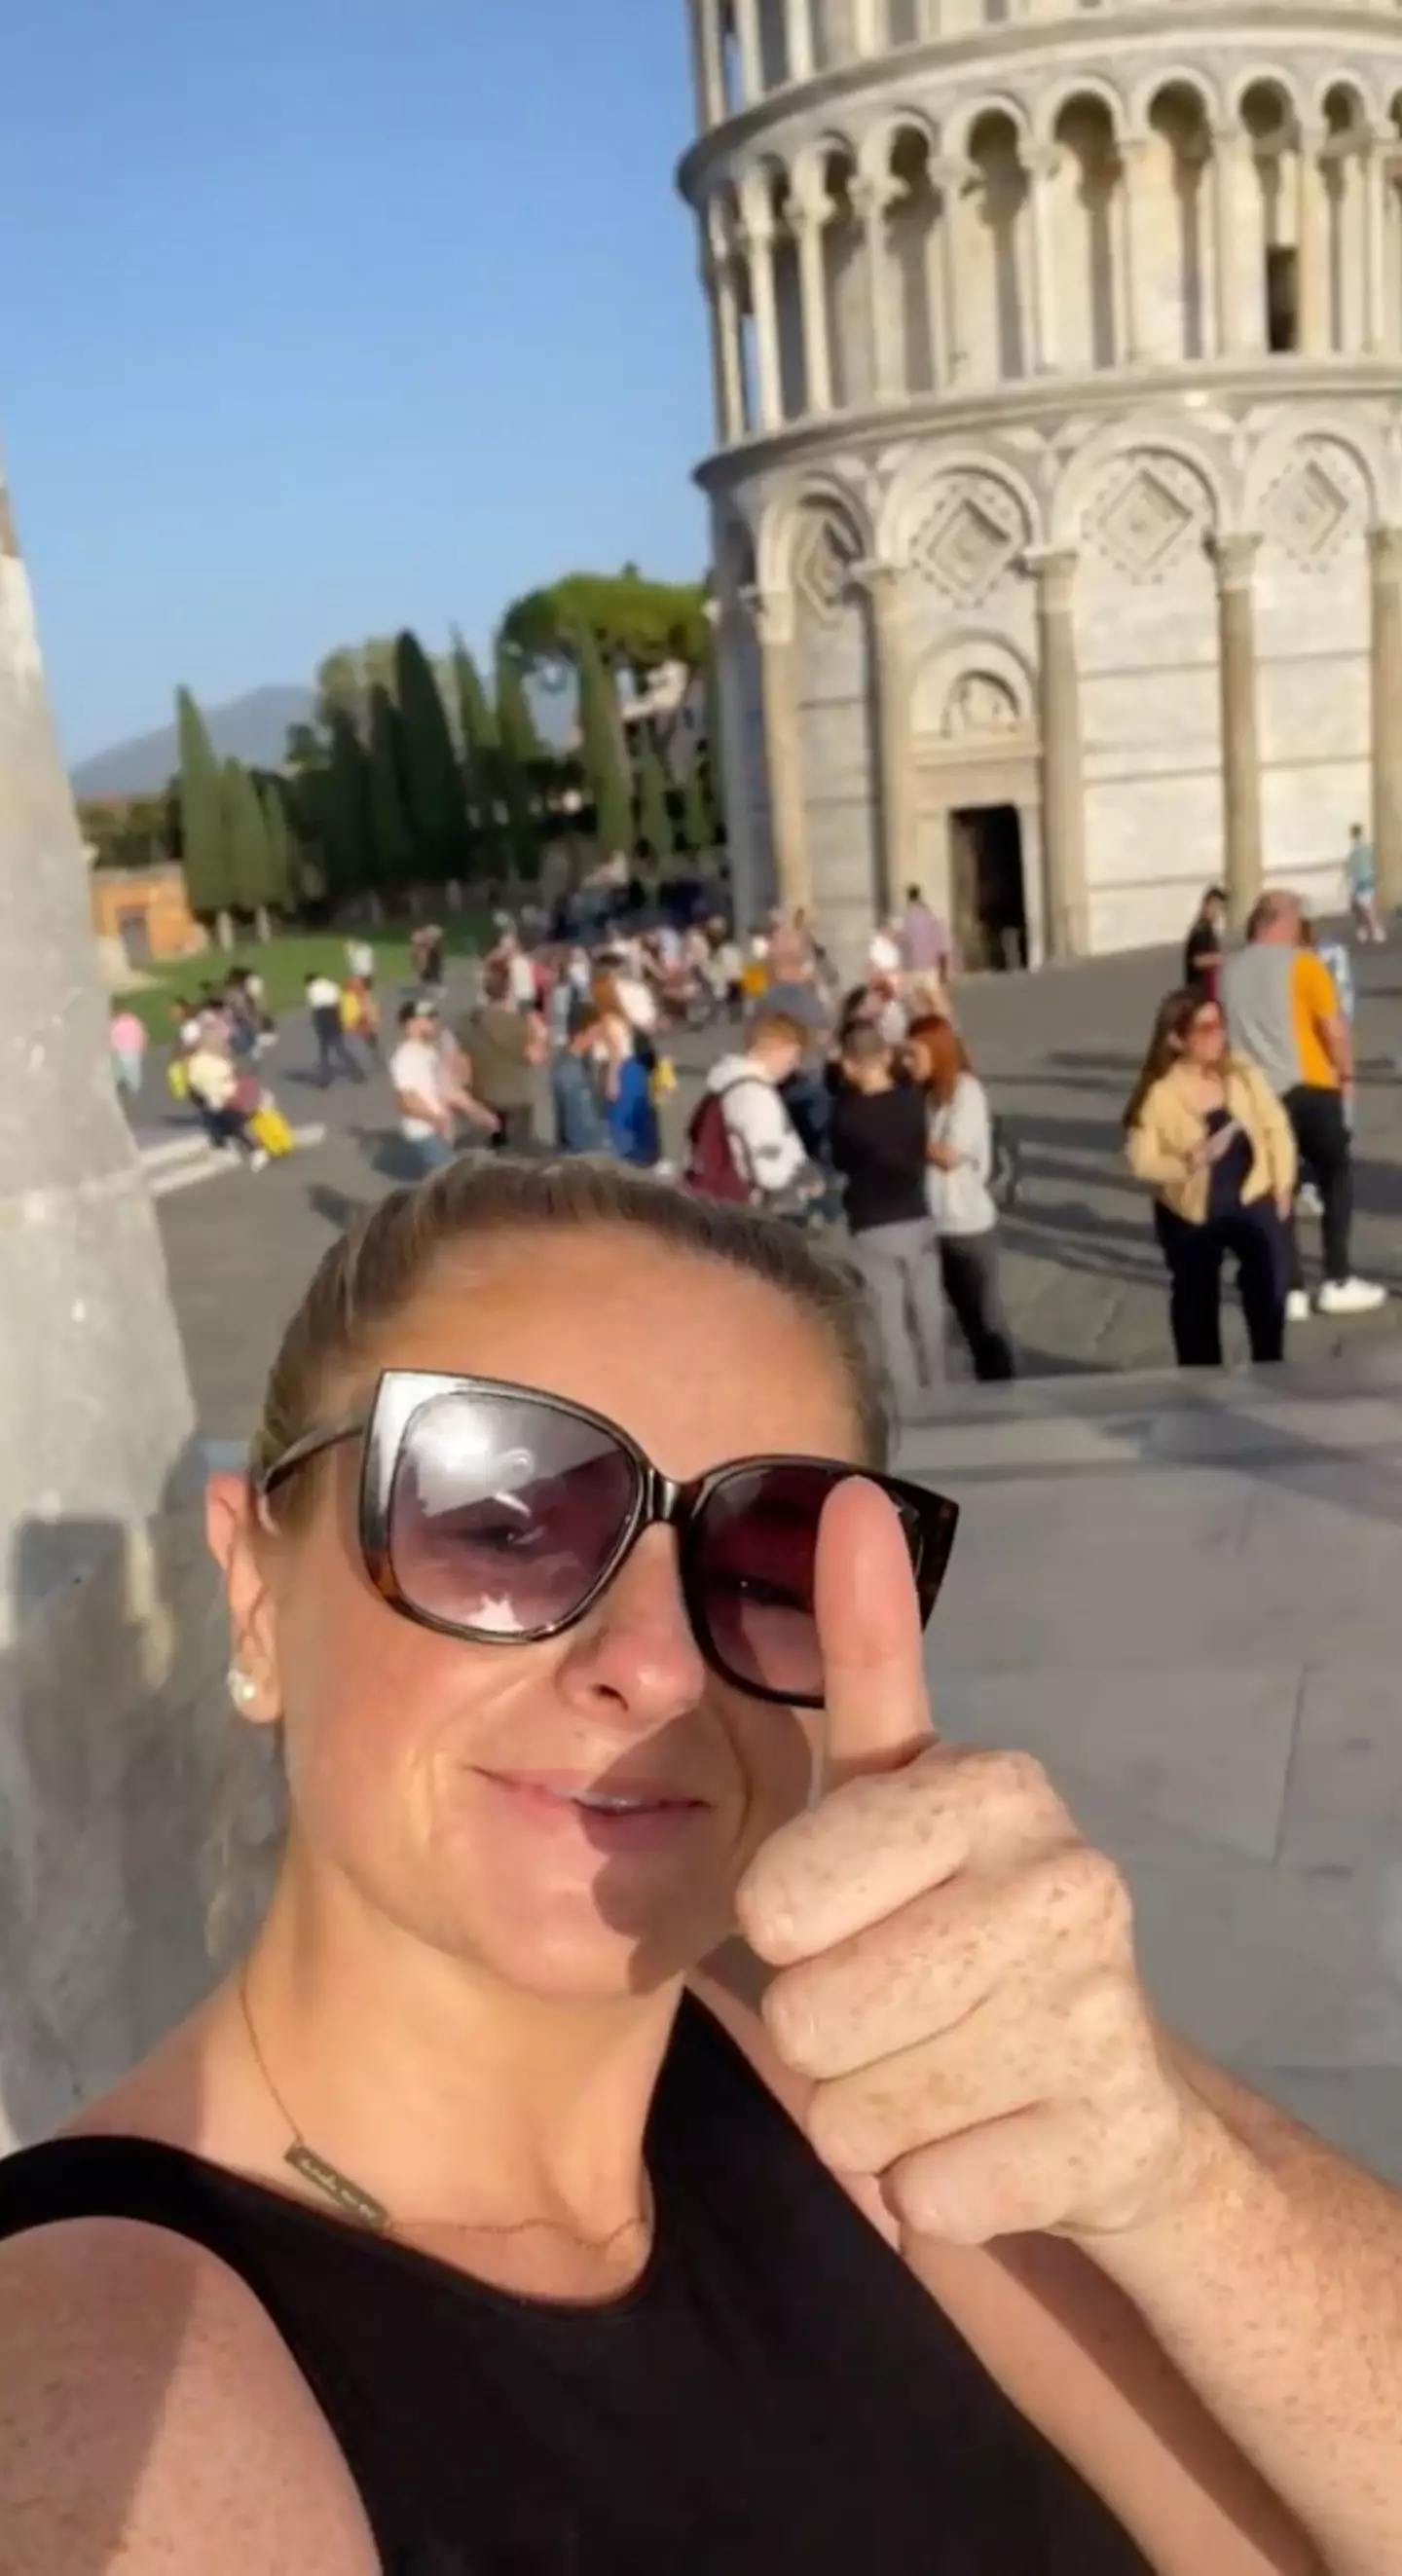 Katie enjoyed a day trip in Pisa for less than the cost of a night out back home.